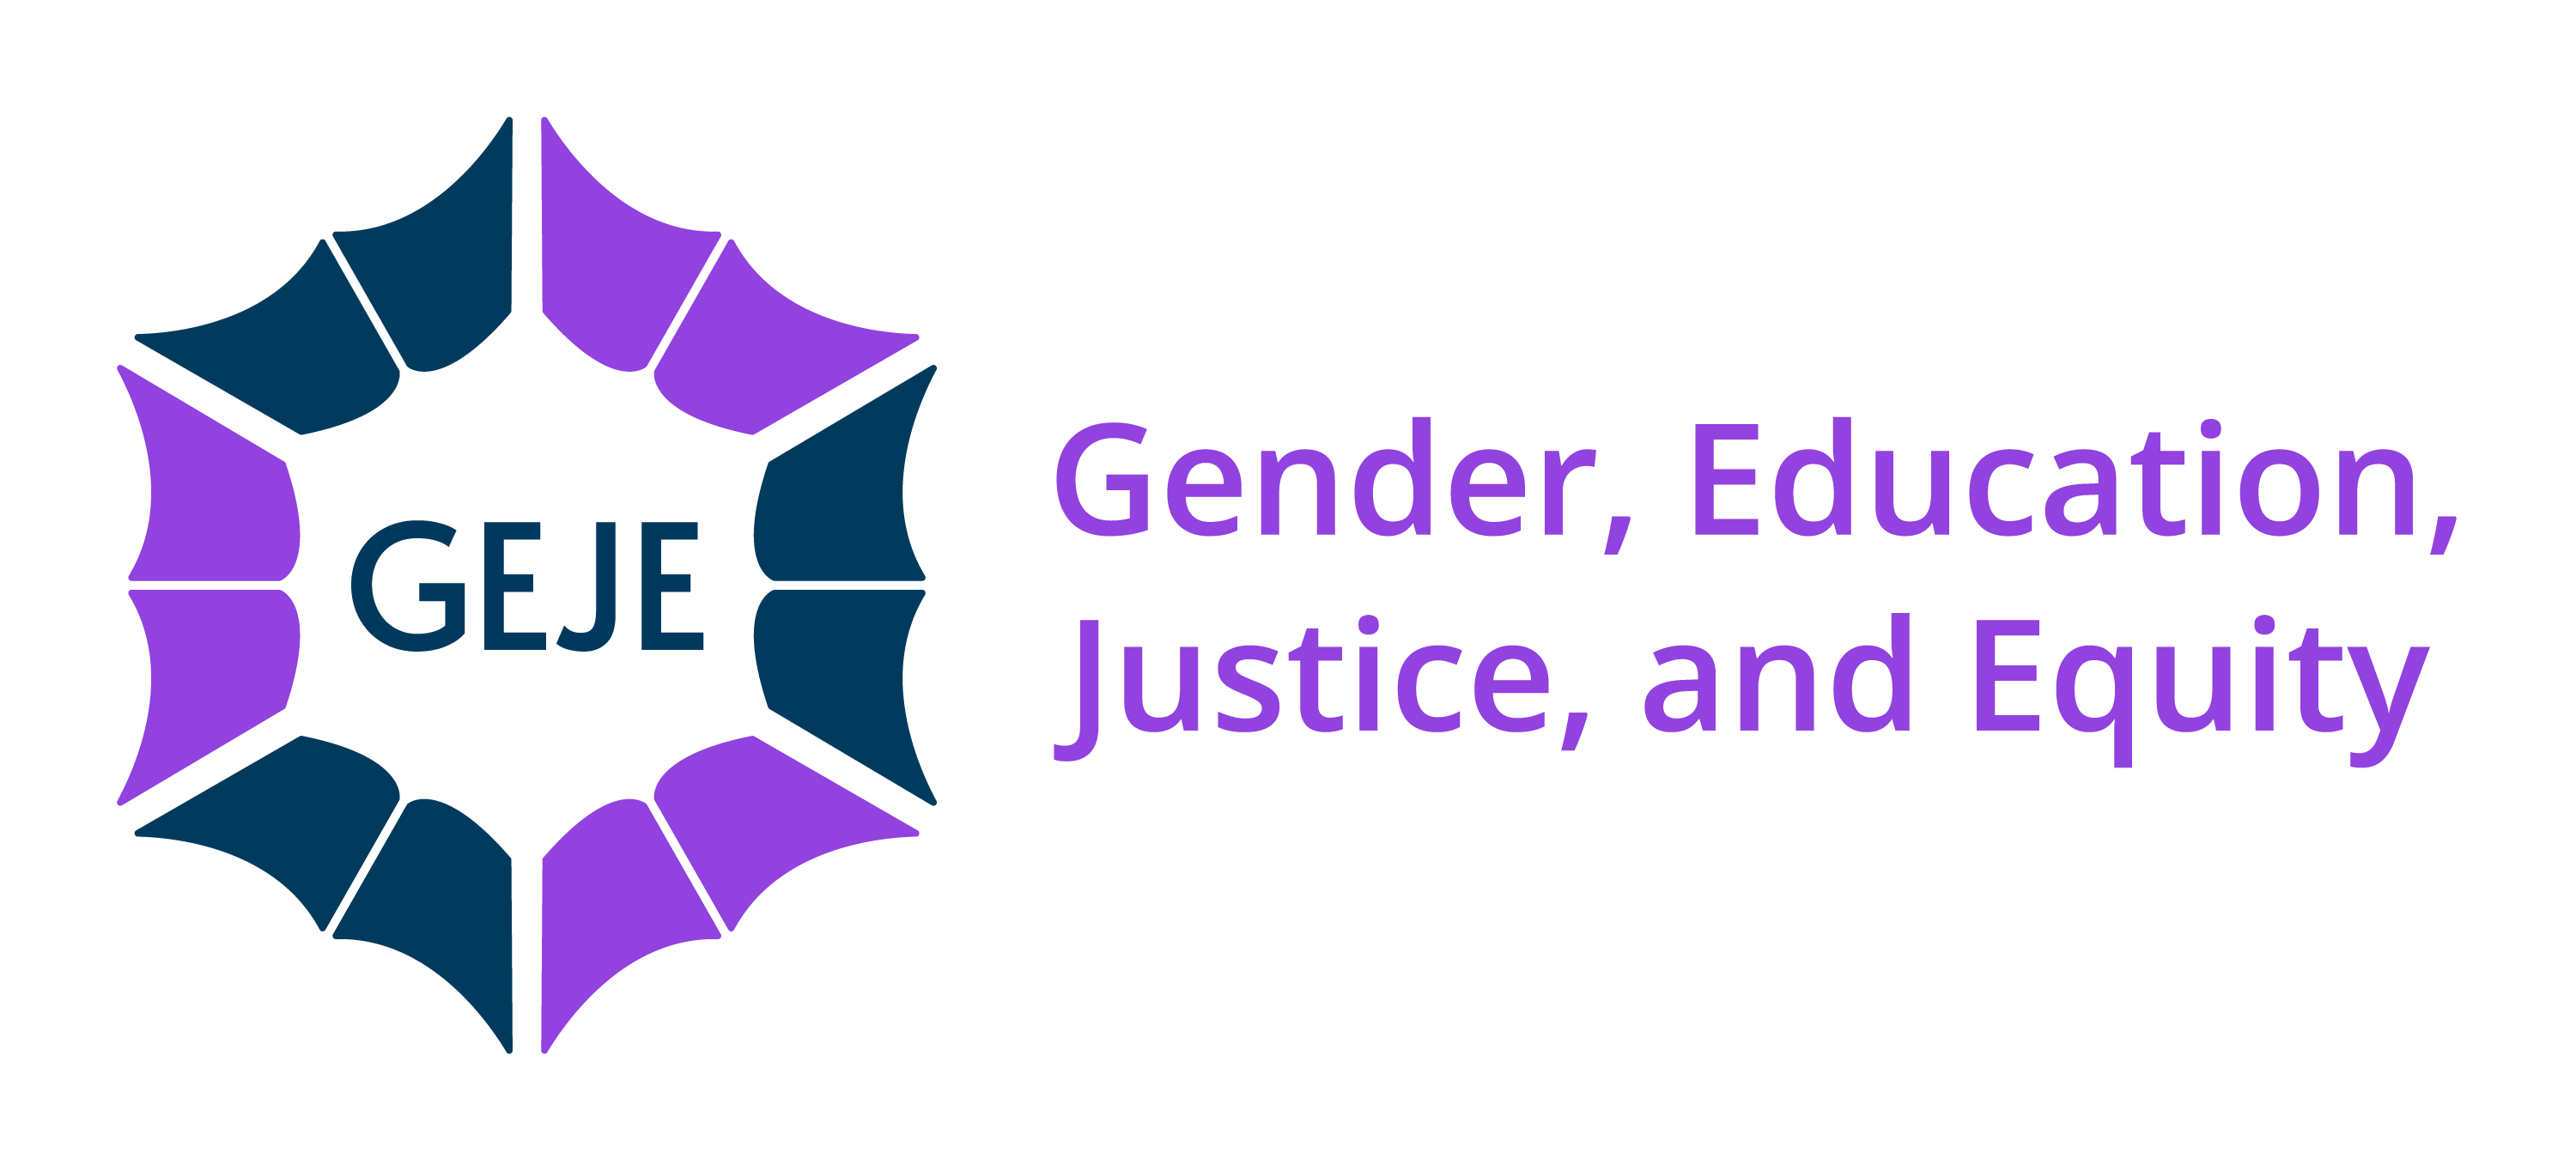 Gender, Education, Justice, and Equity (GEJE)